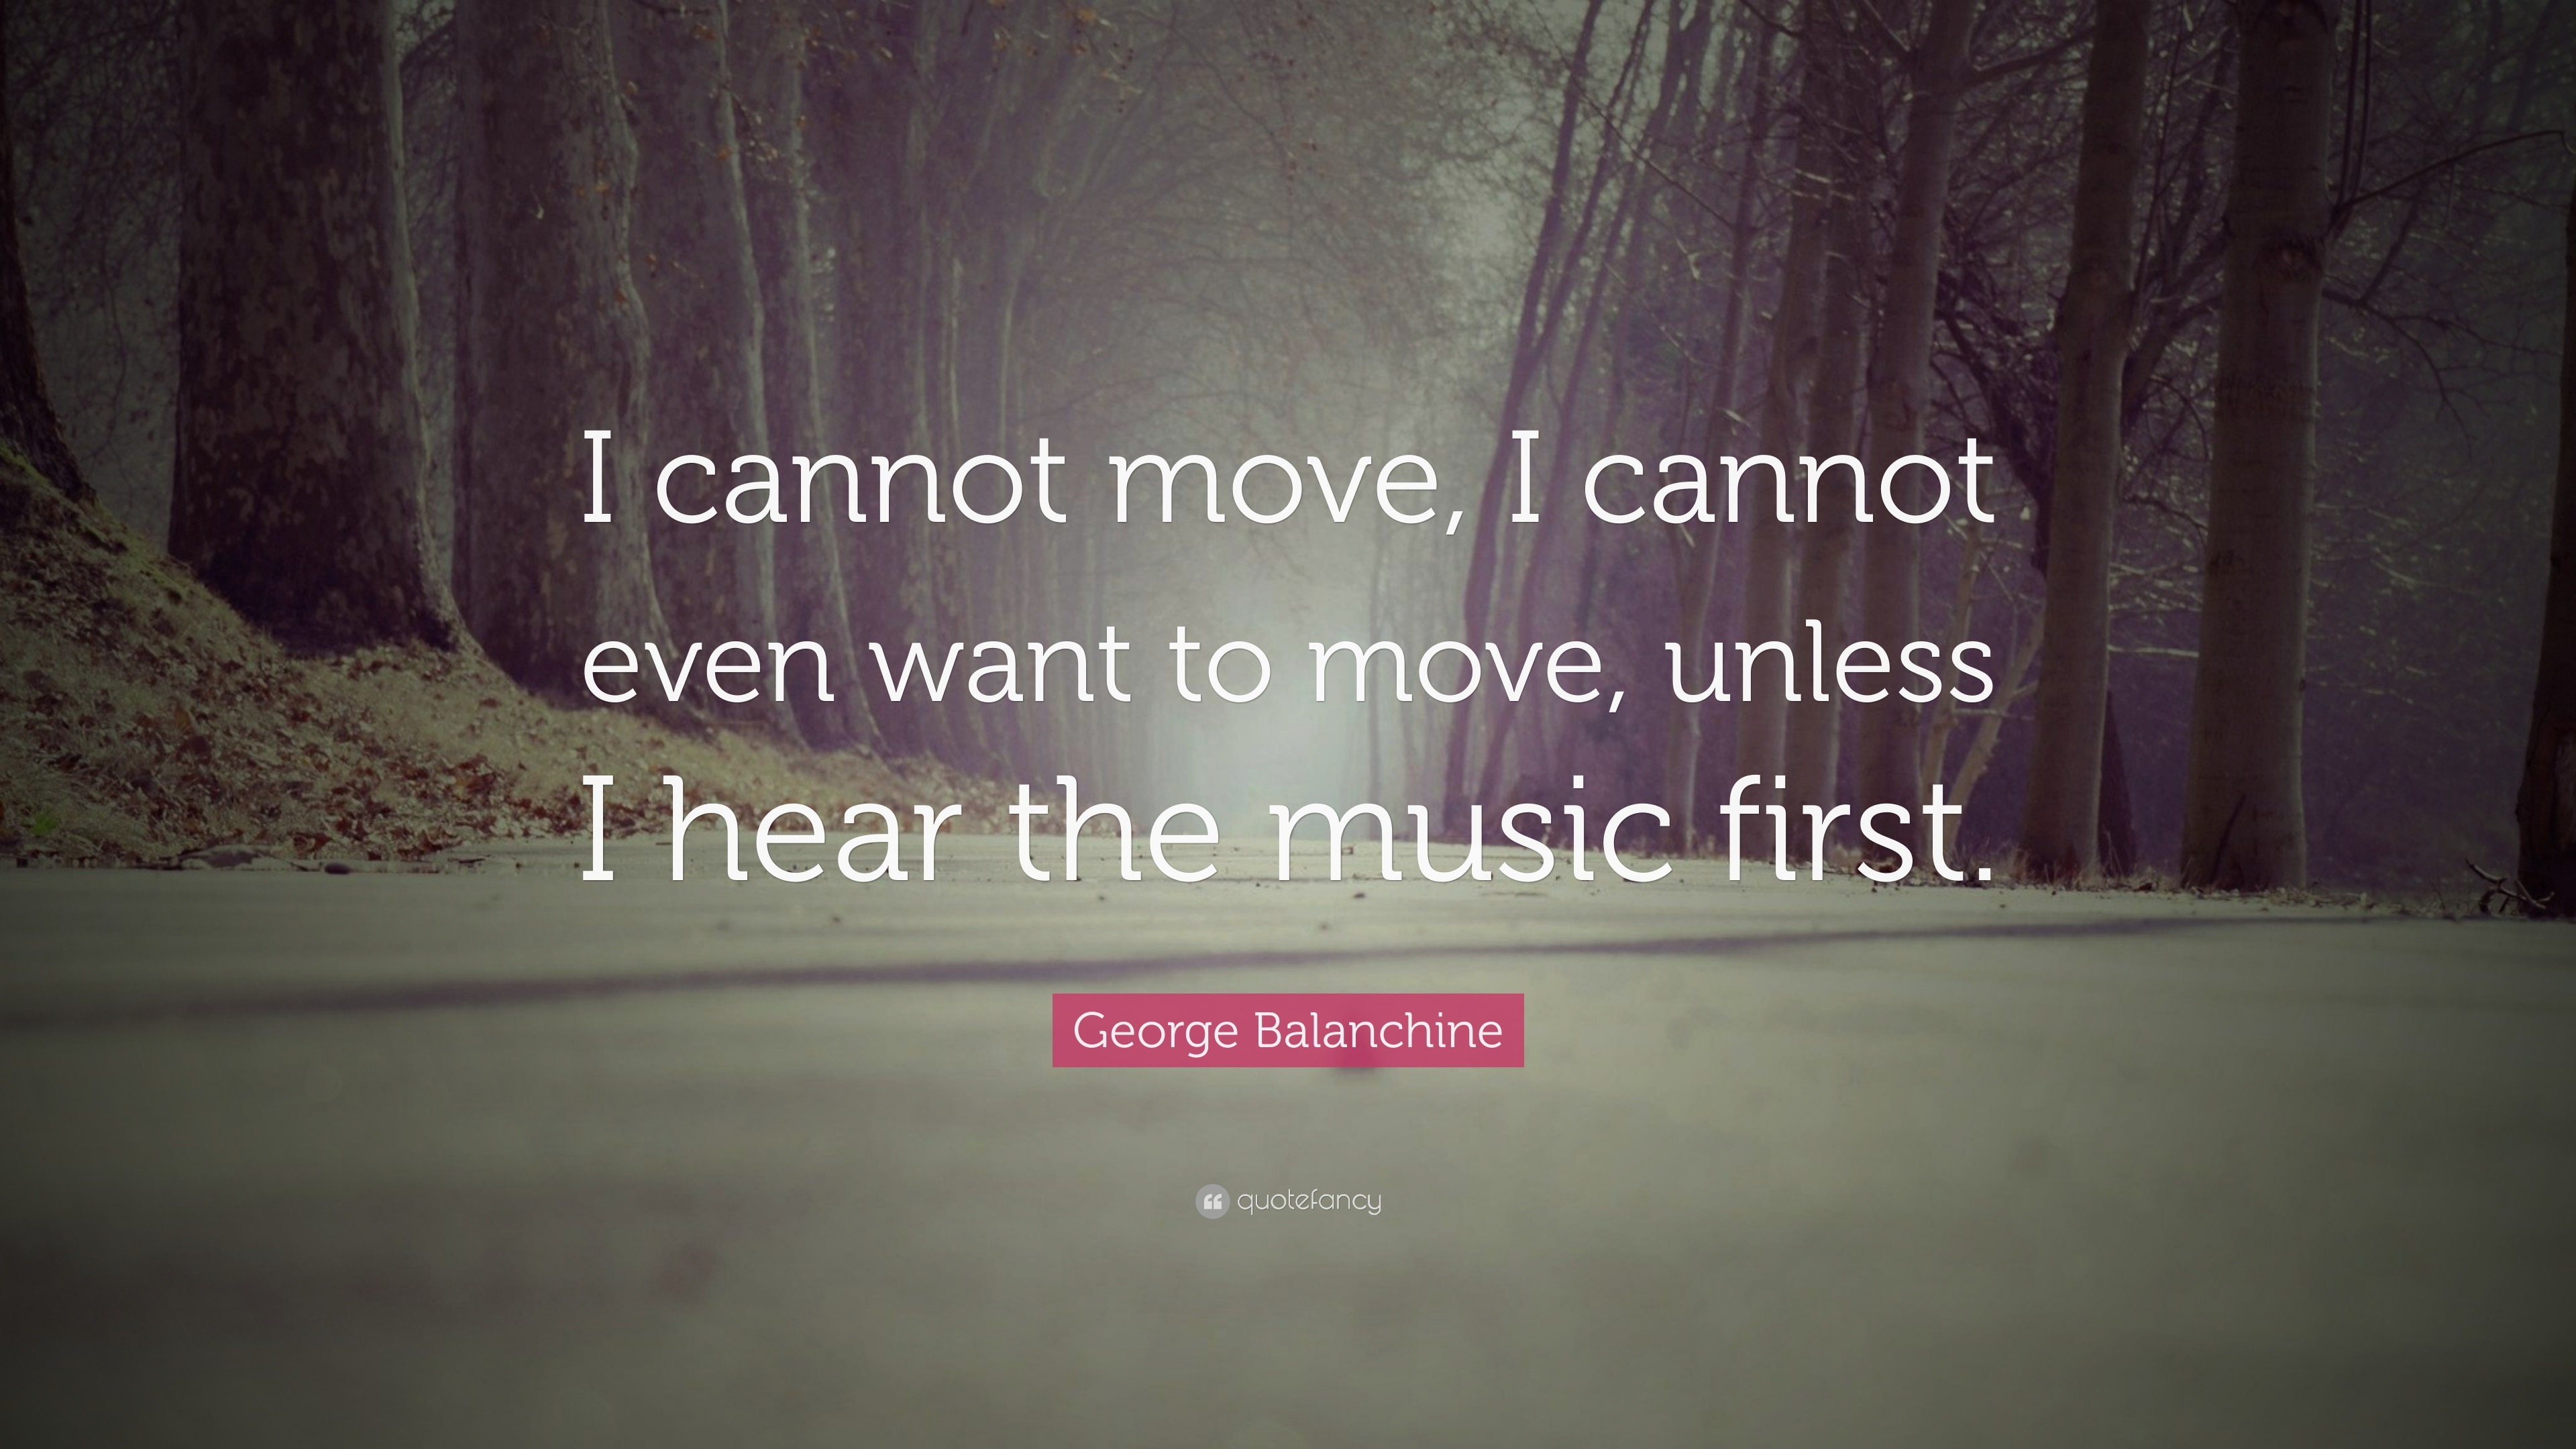 3840x2160 George Balanchine Quote: “I cannot move, I cannot even want to move,